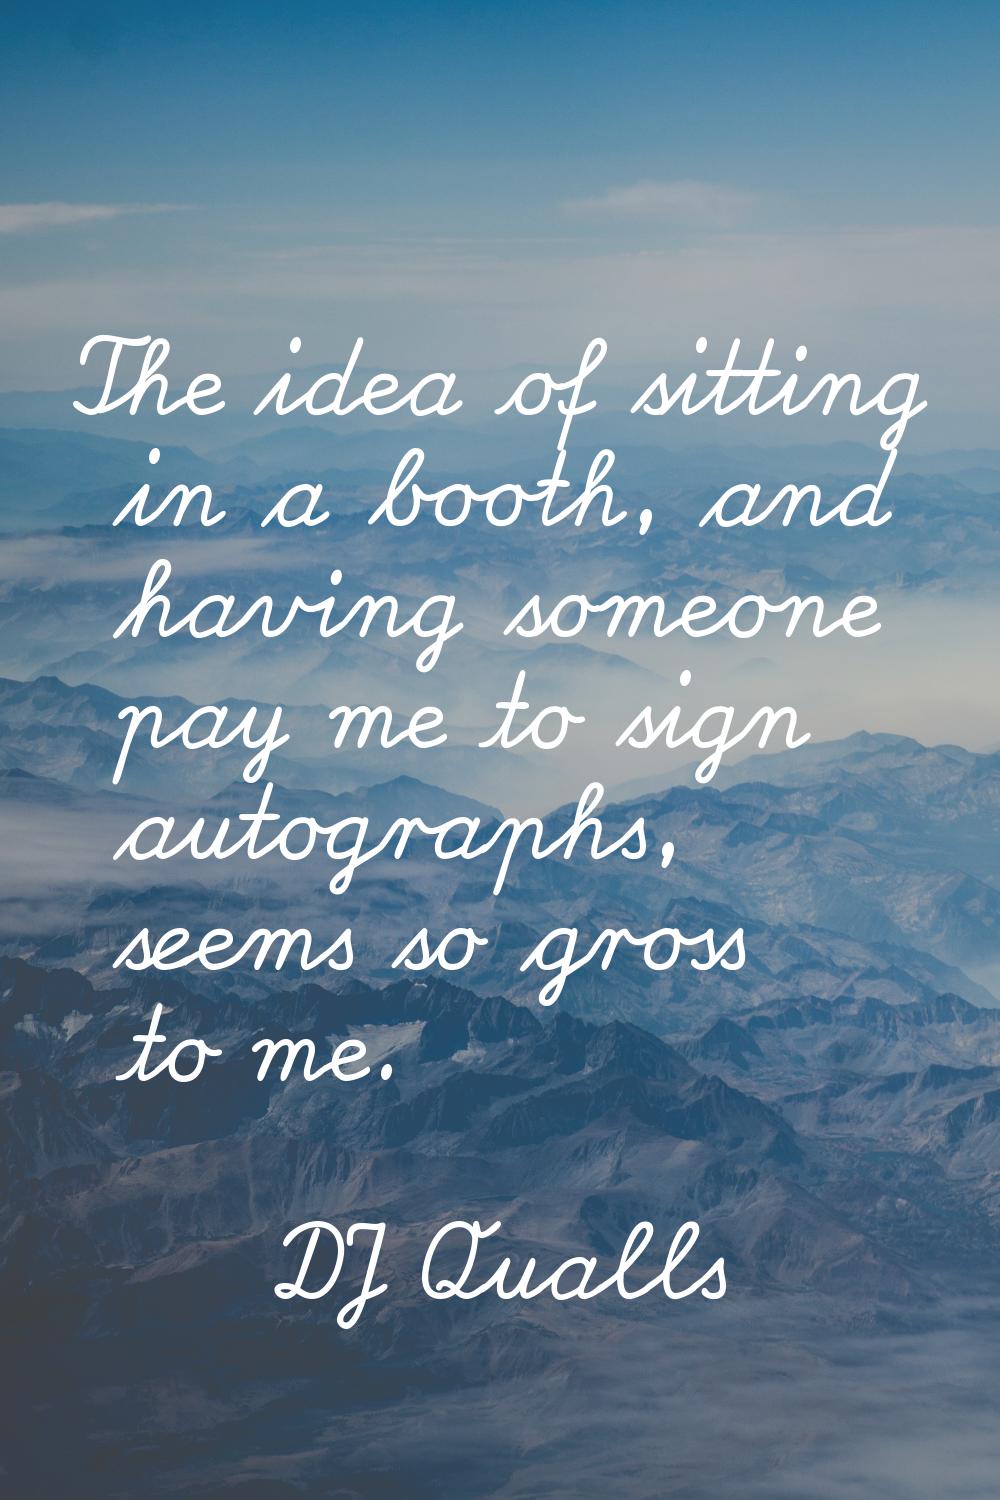 The idea of sitting in a booth, and having someone pay me to sign autographs, seems so gross to me.